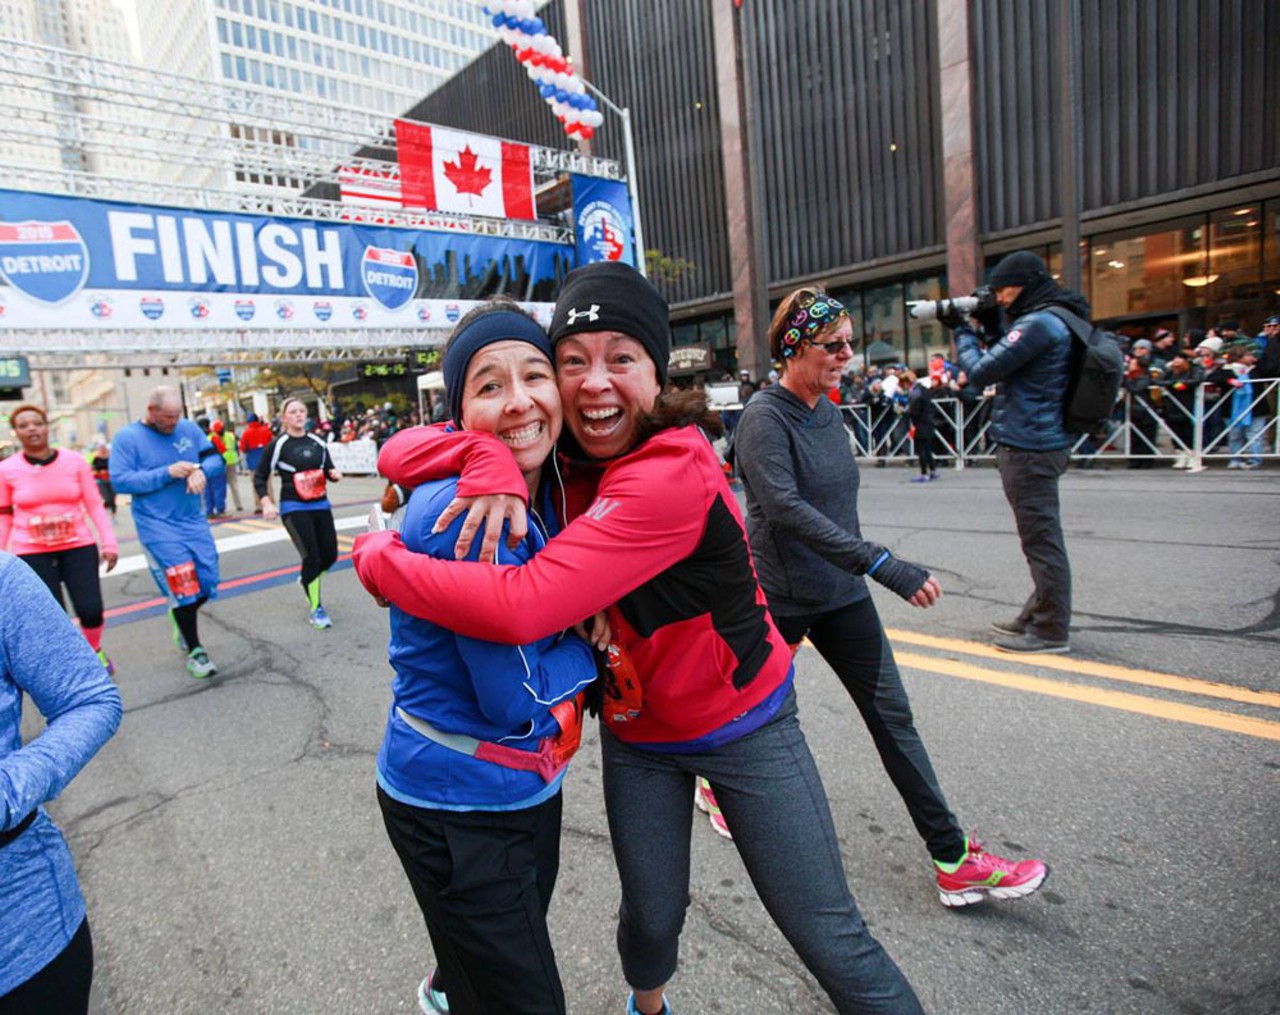  Detroit Free Press Marathon
October 15
@ Downtown Detroit
The Free Press marathon is the marathon for runners in metro Detroit. Over 30,000 runners participate in various stages of the marathon. Plus, you get to run into Canada and back. How fun is that?